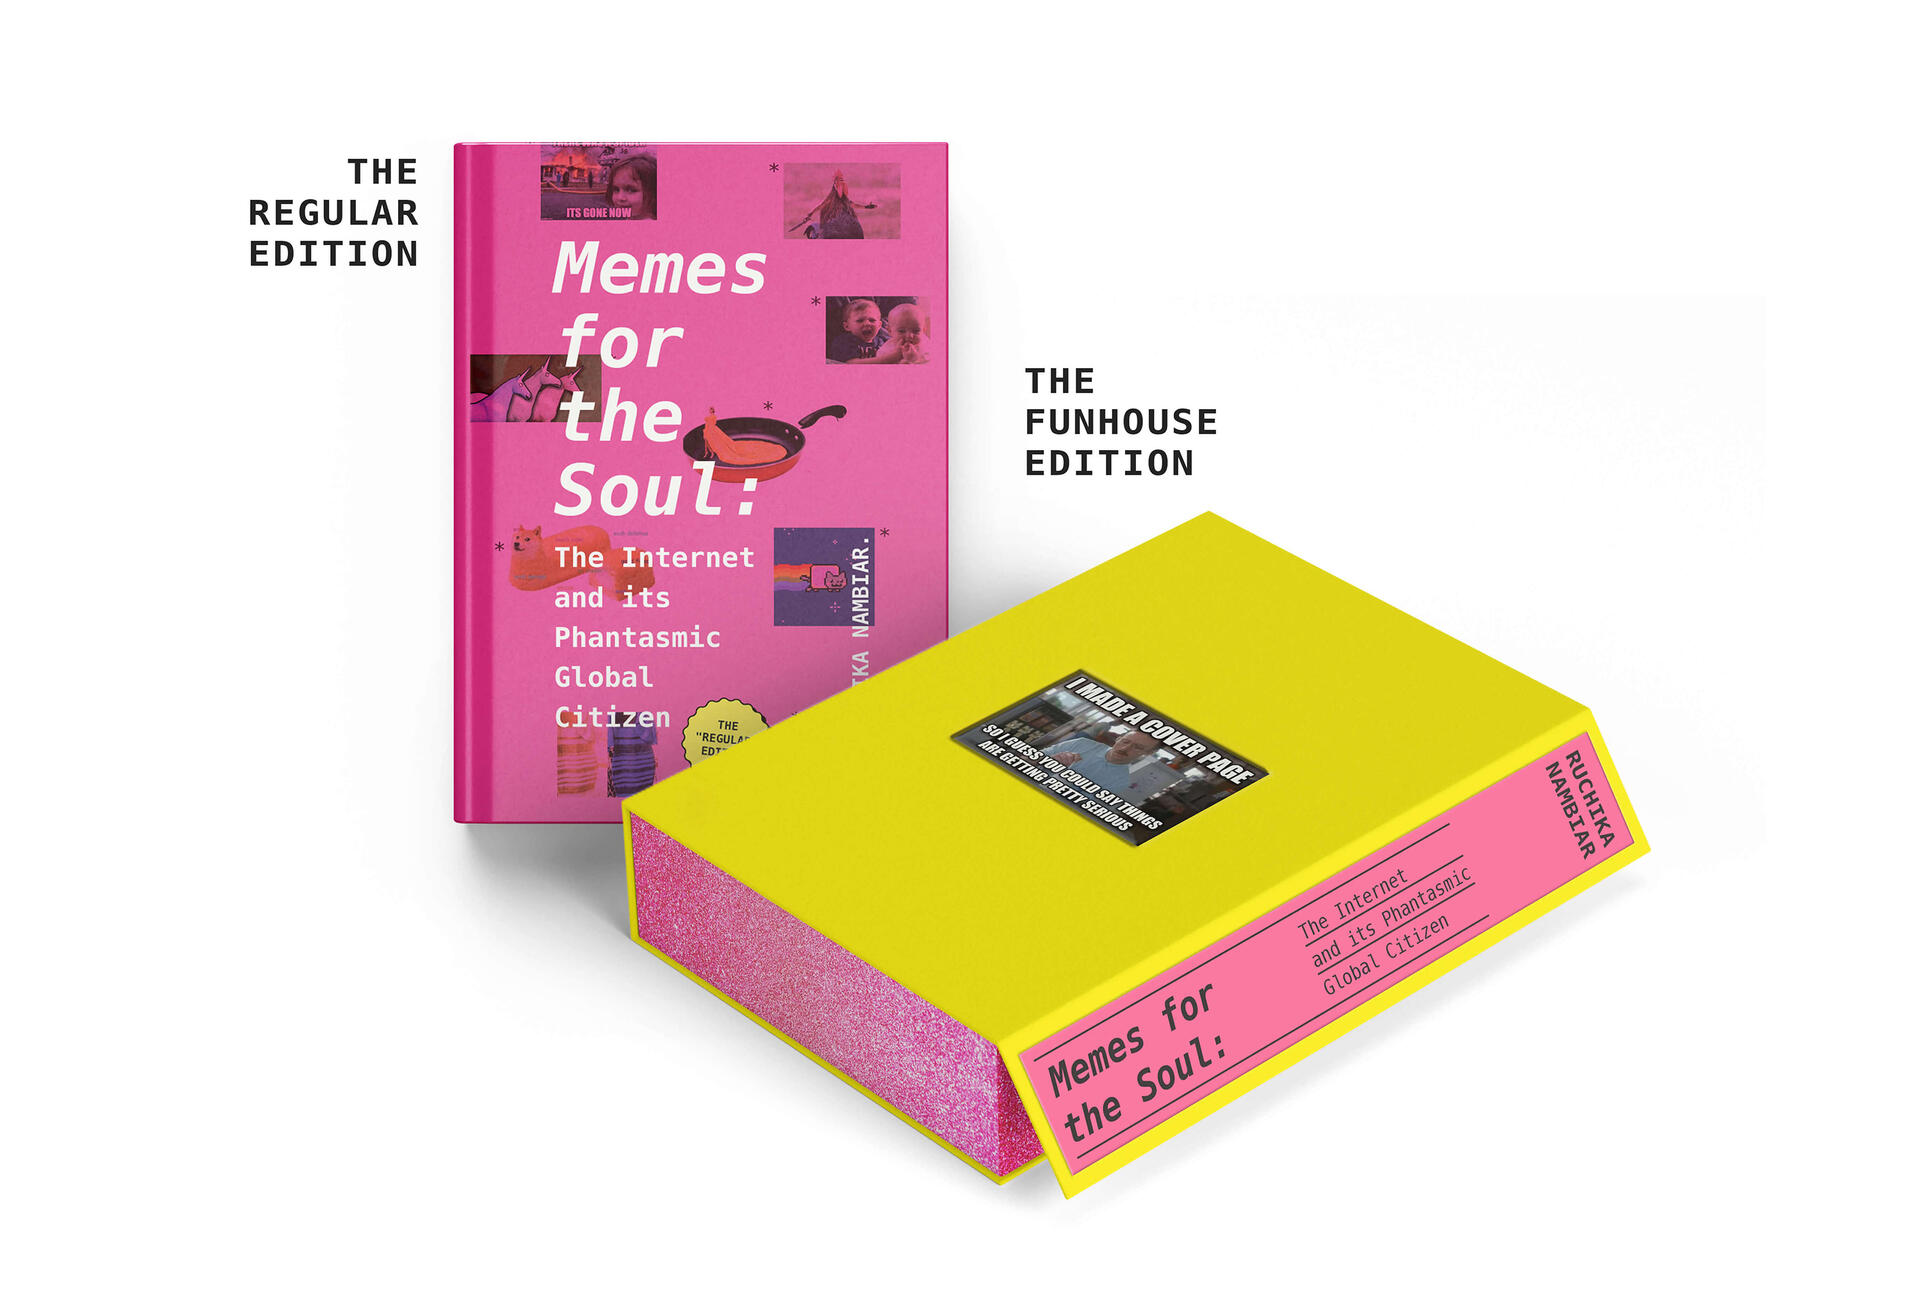 Digital visualization of a pink hardcover book, beside a yellow clamshell box.